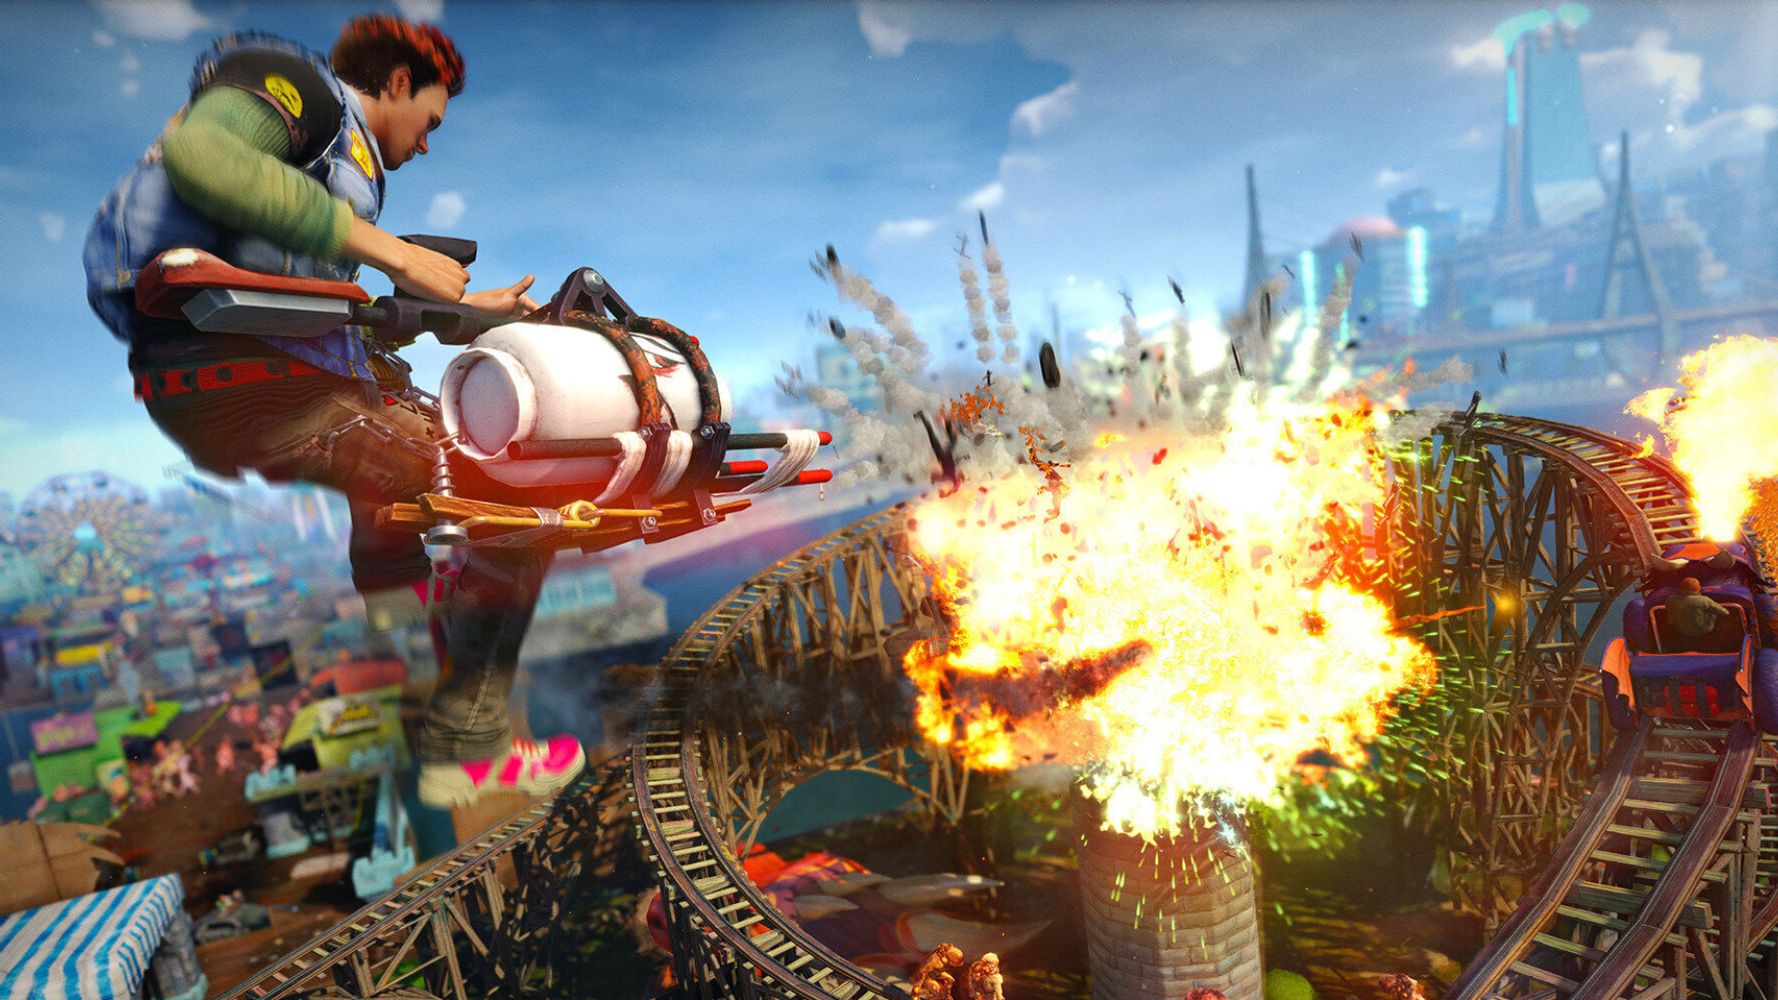 Sunset Overdrive review: You got some Tony Hawk in my shooter